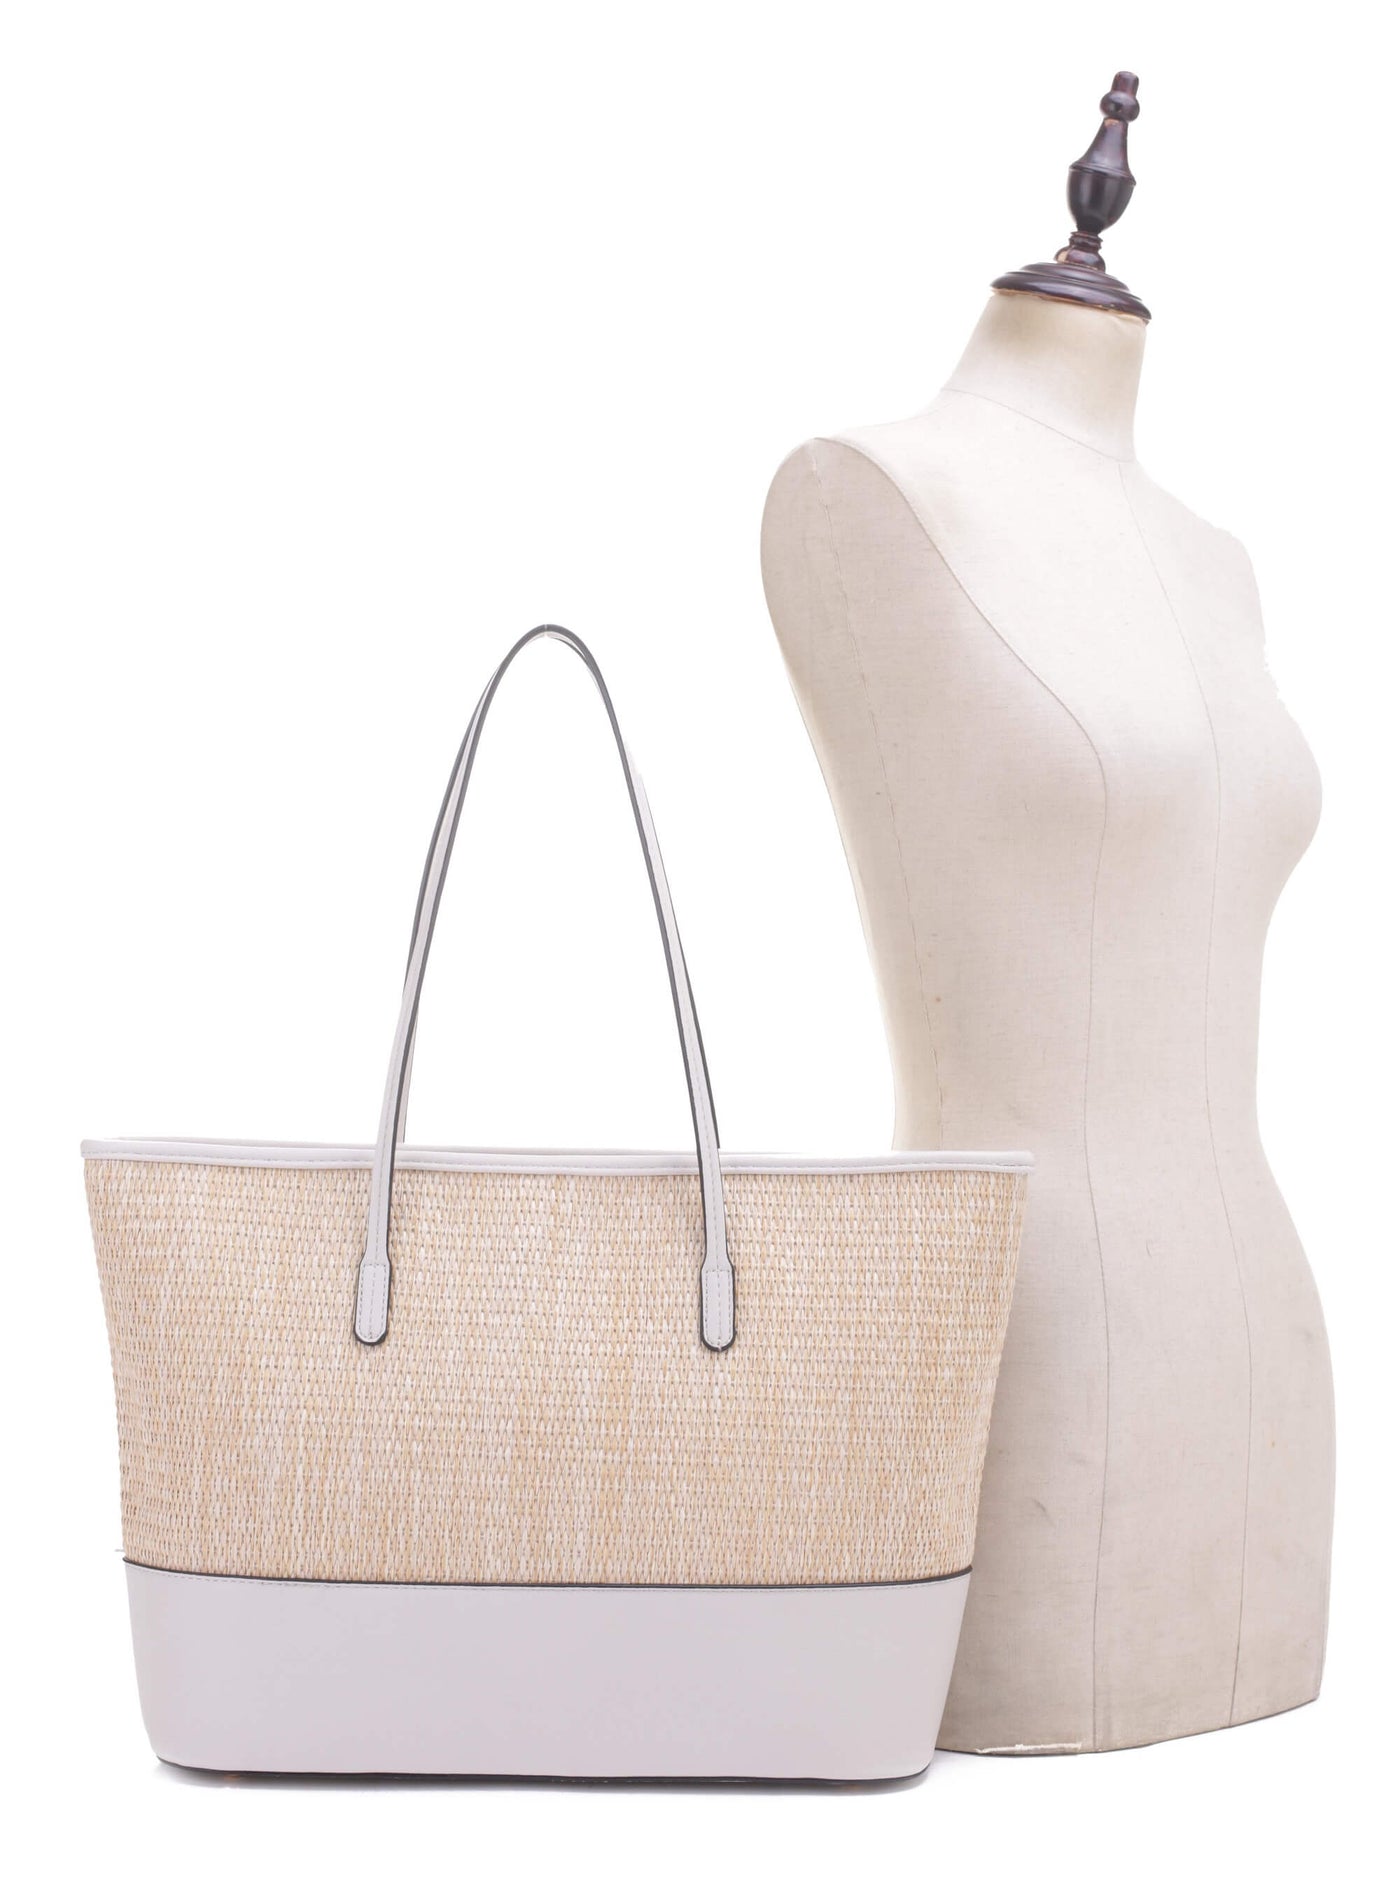 93130 Straw Shopper Tote With Vegan Leather Trim